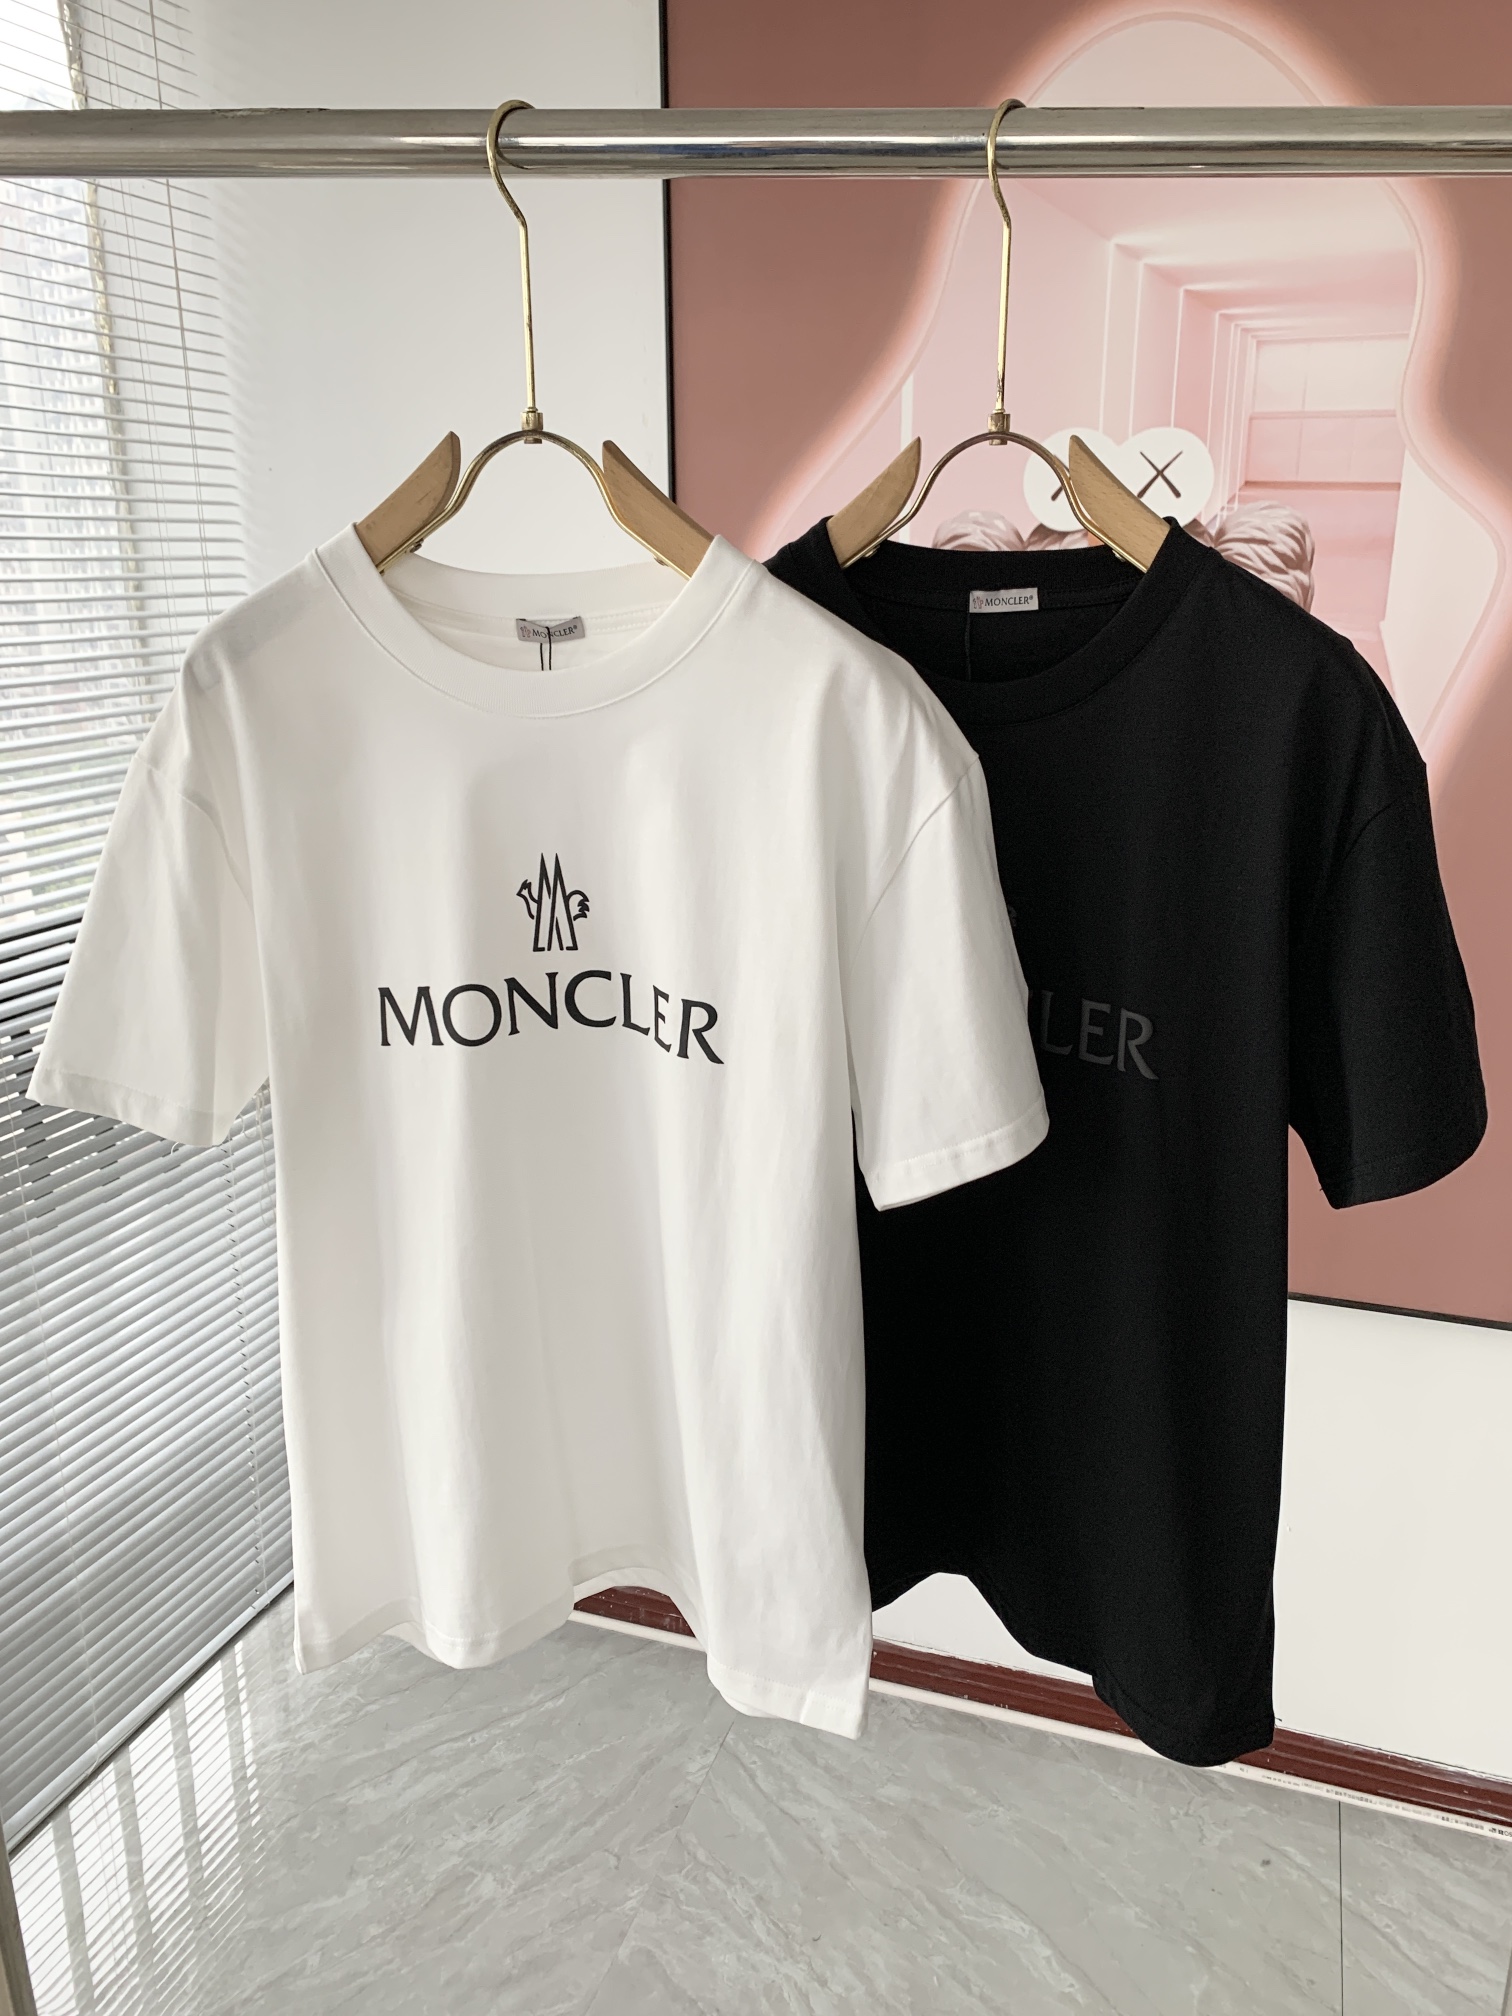 Moncler Clothing T-Shirt Printing Unisex Cotton Spring/Summer Collection Short Sleeve